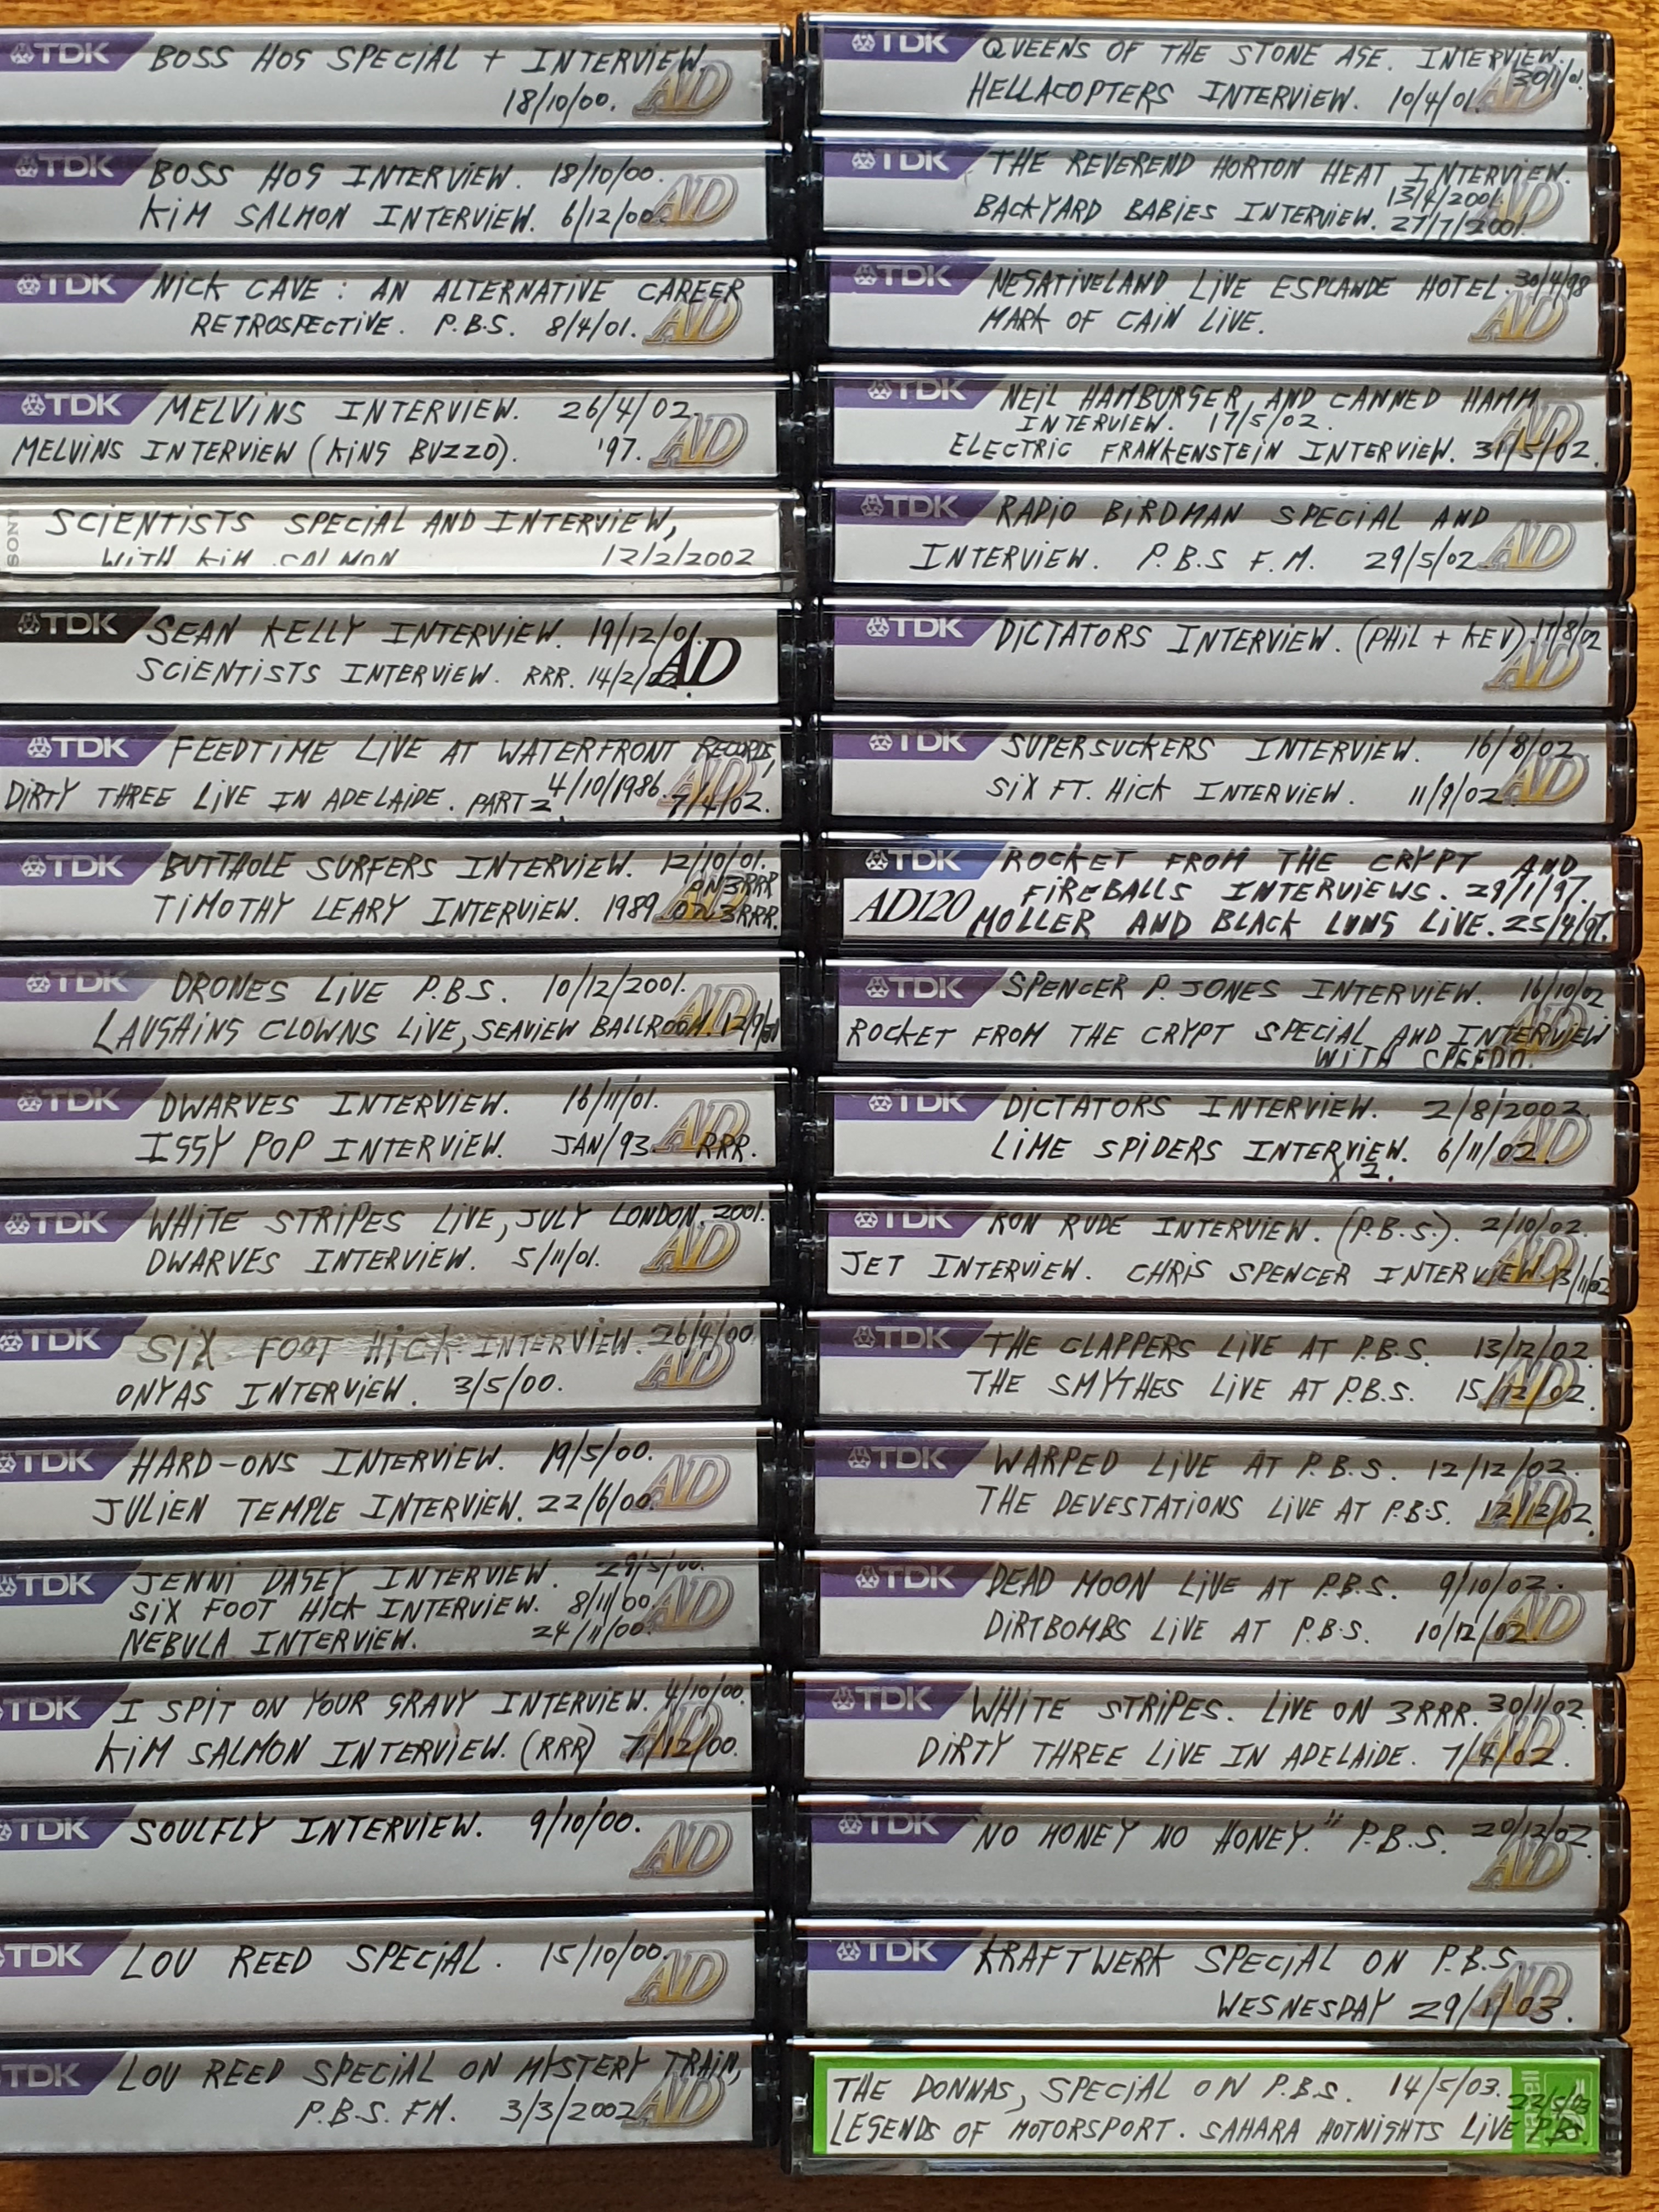 Phil MacDougall Tapes IVs